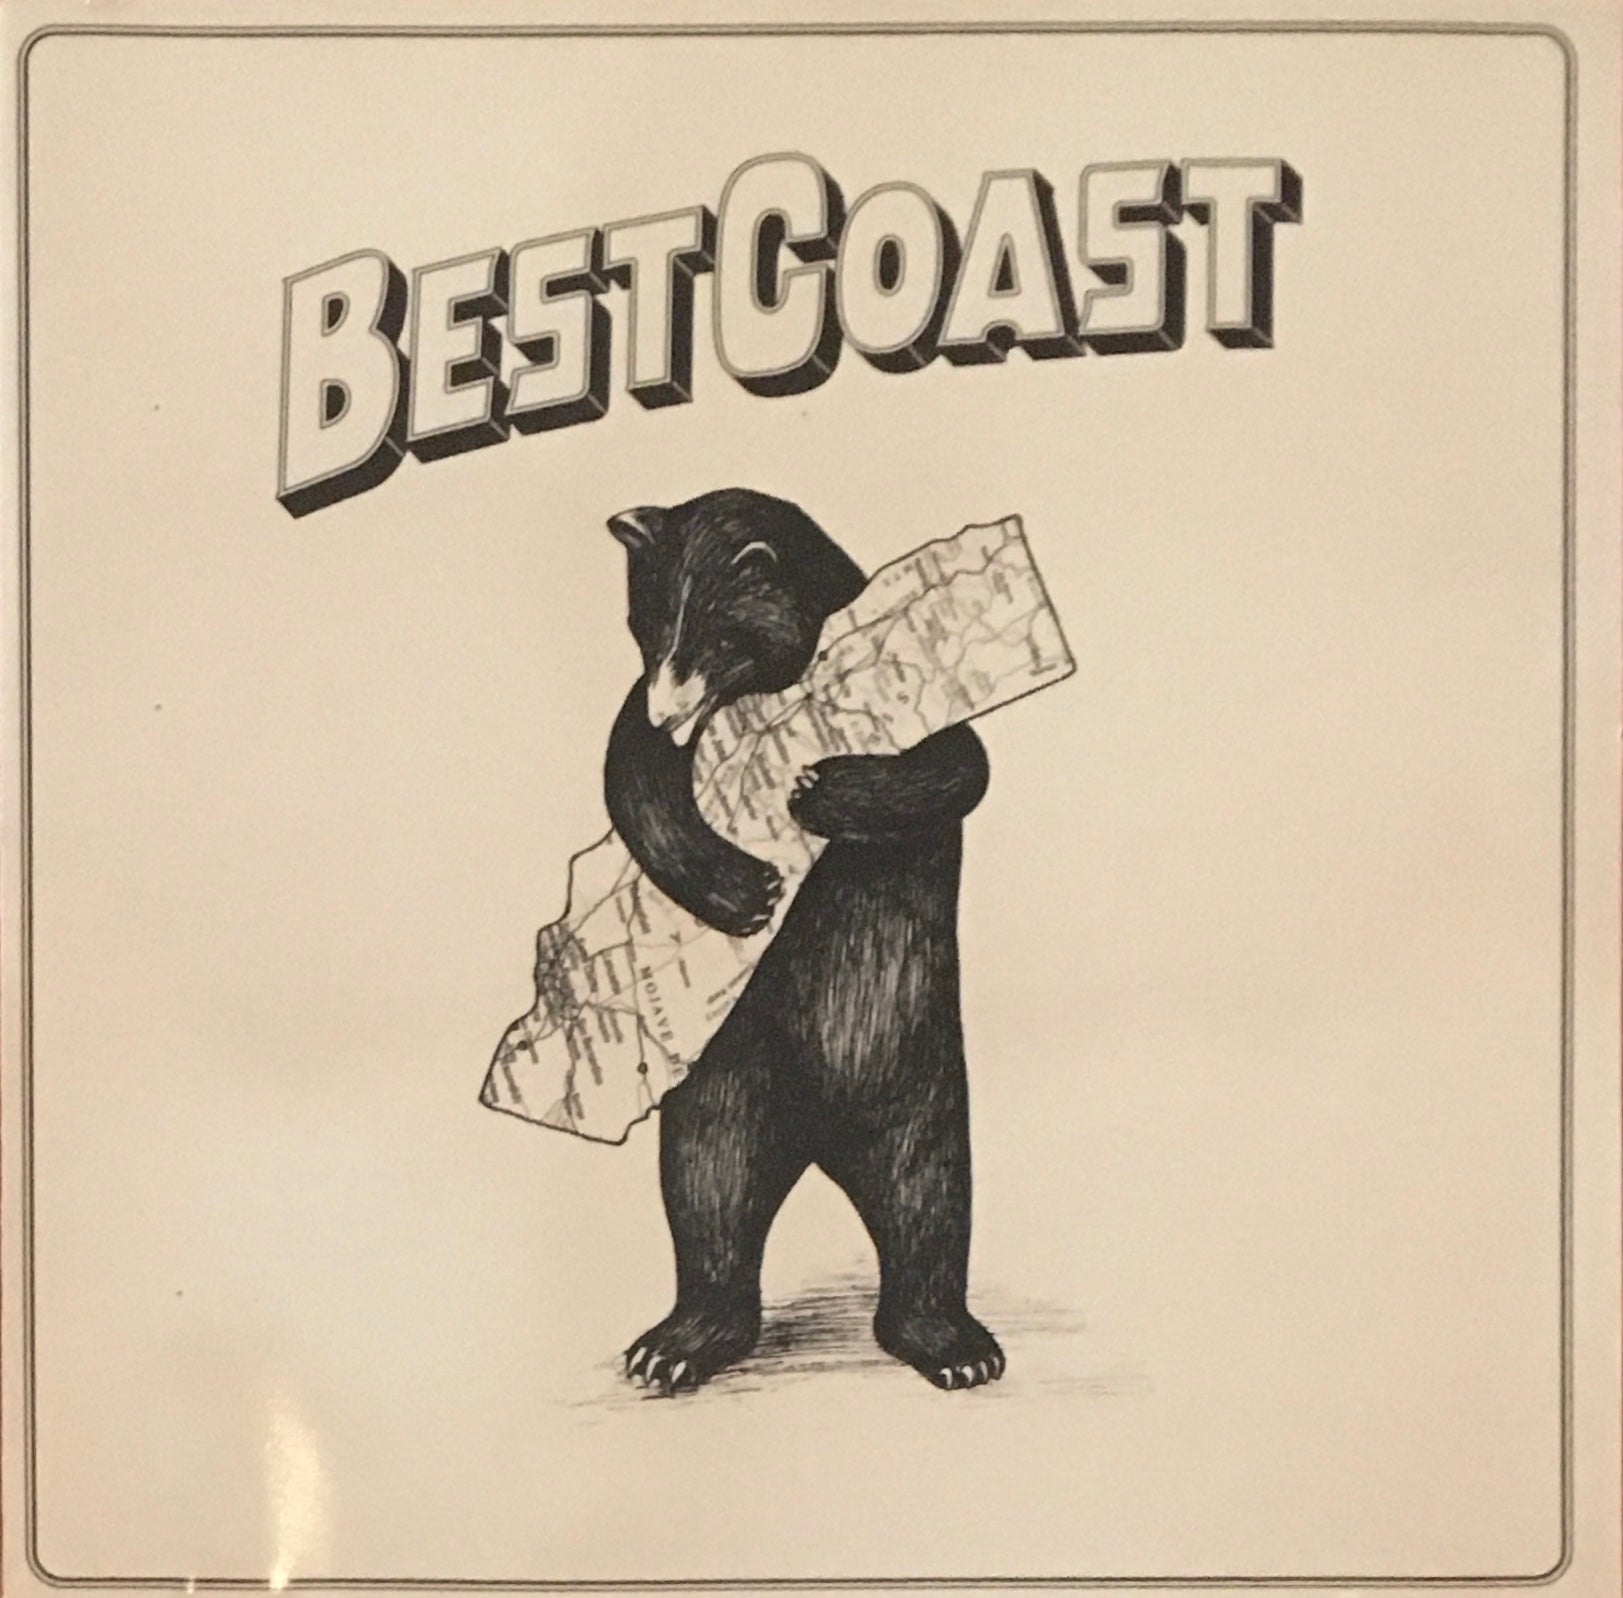 Best Coast “The Only Place” CD (2012)